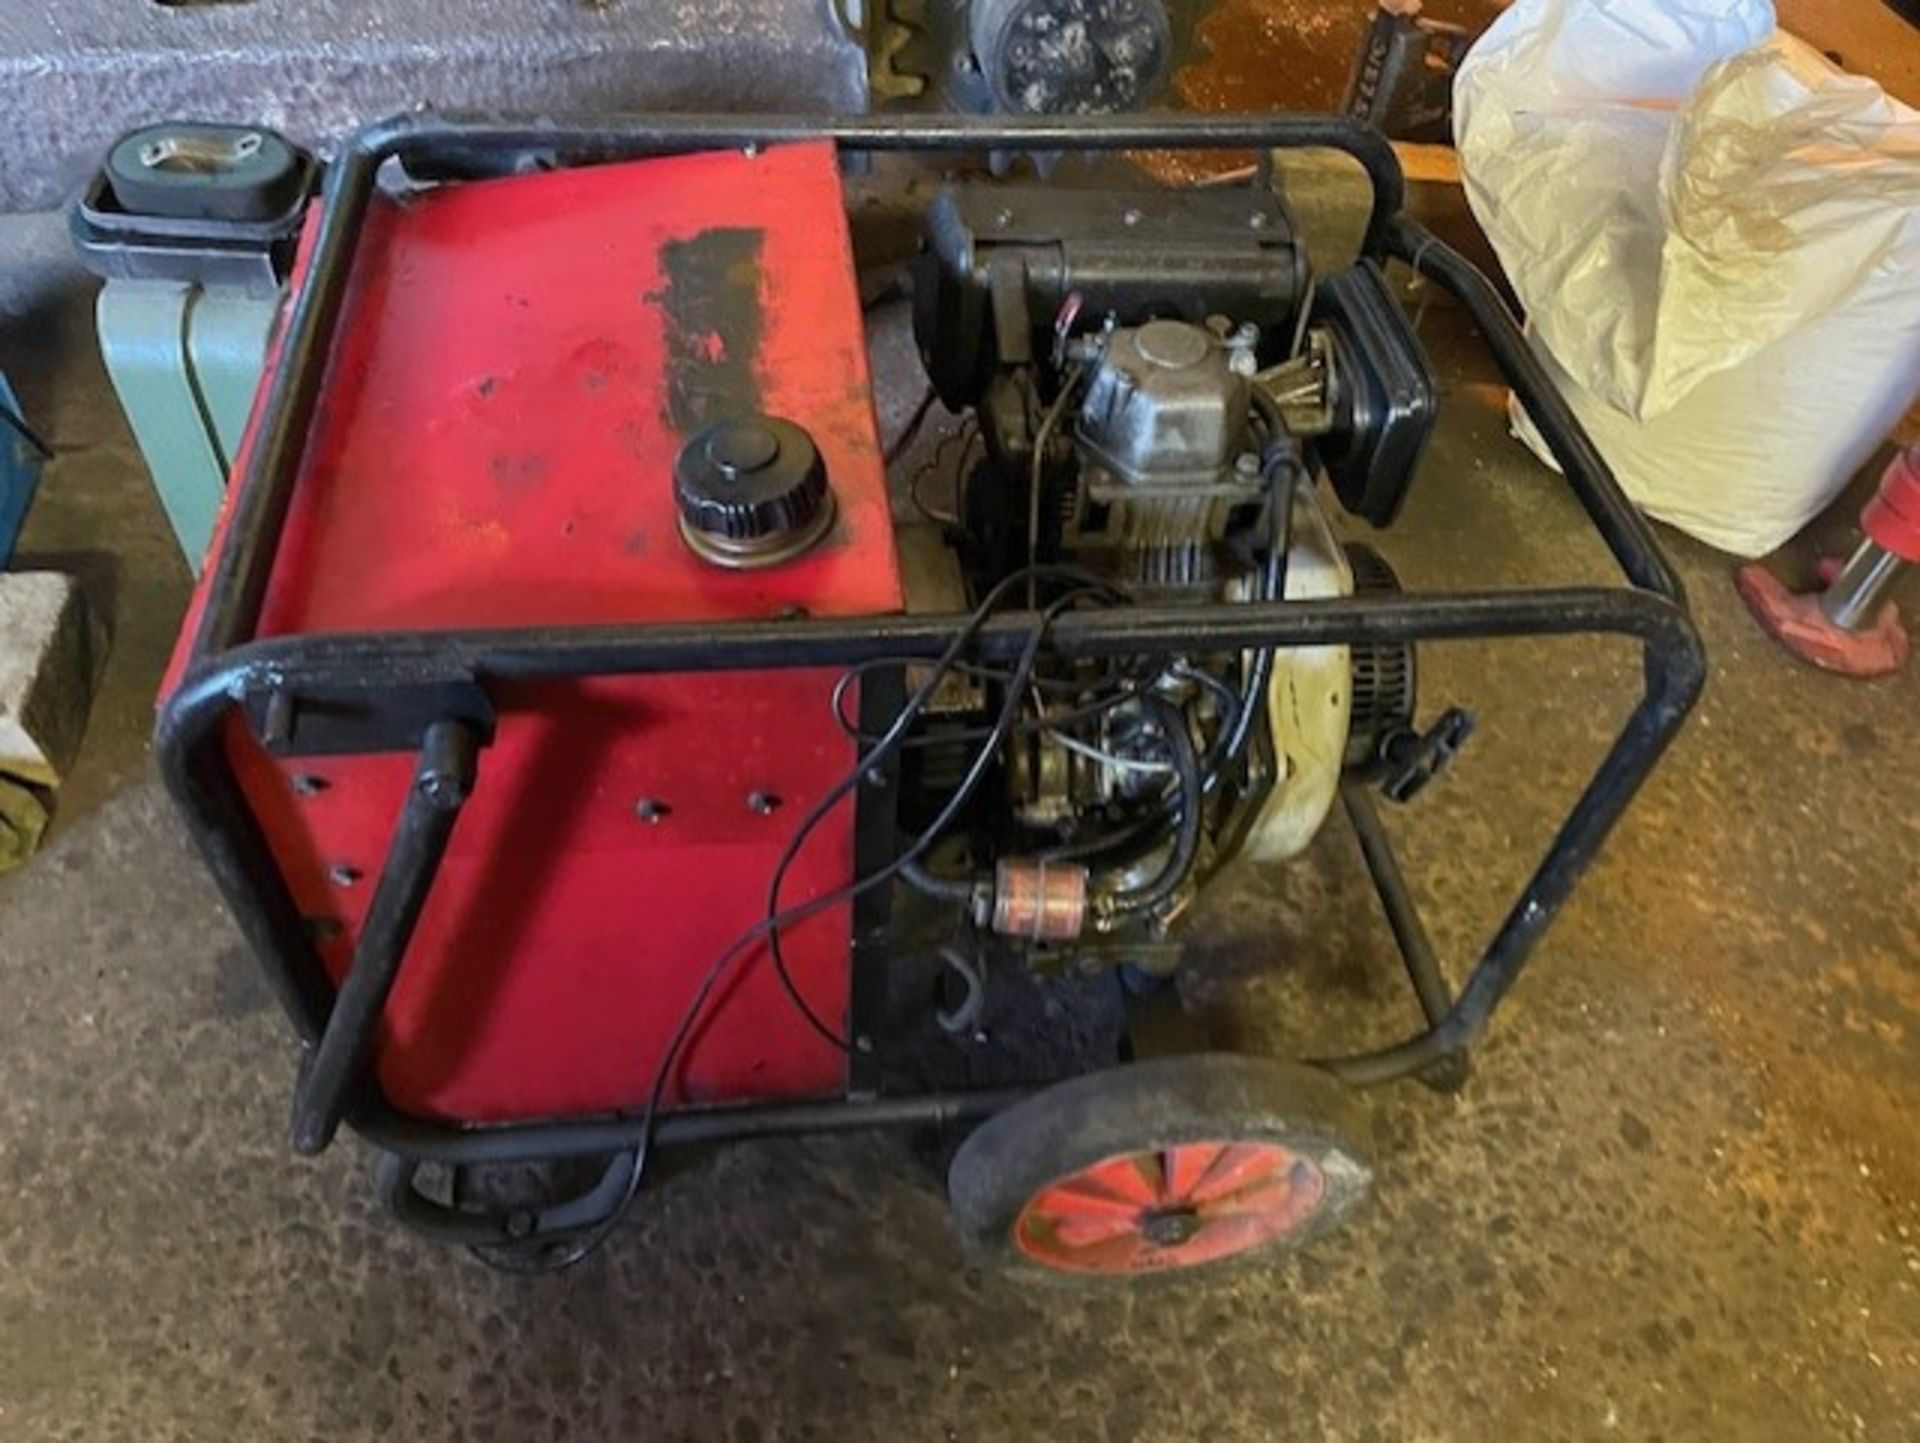 Generator with yanmar diesel engine won’t start so sold as not working - Image 3 of 5